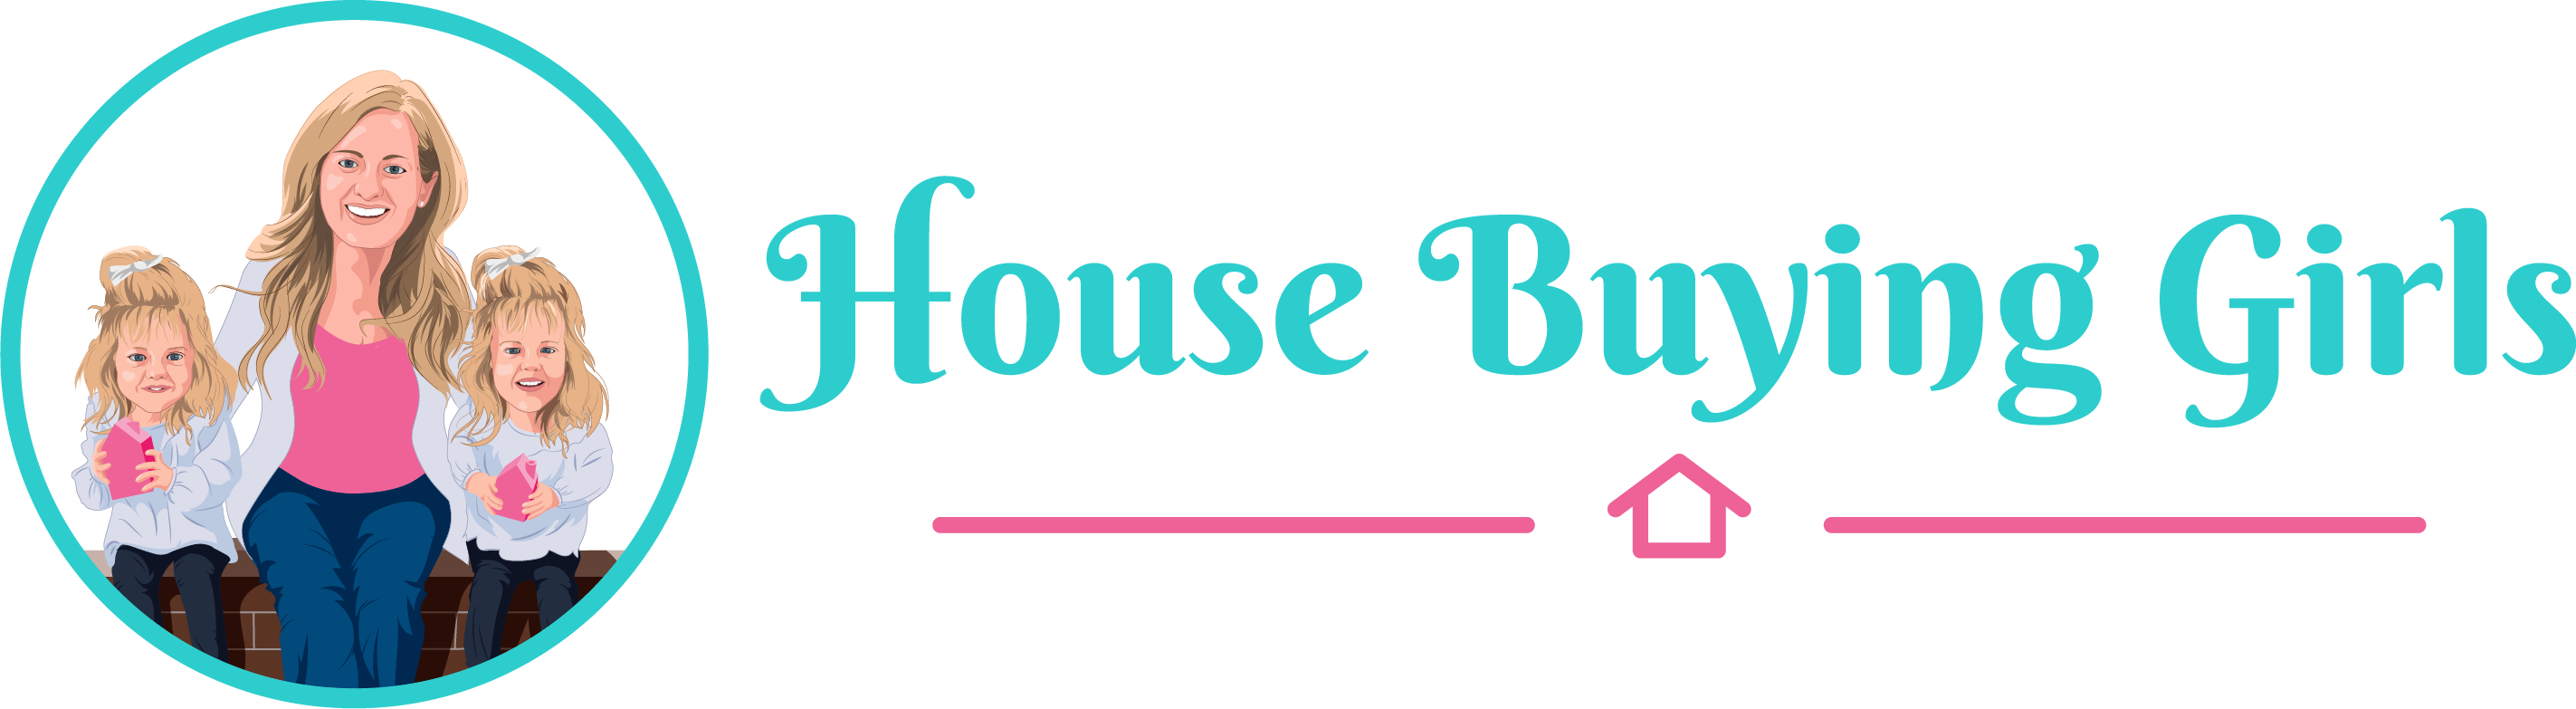 House Buying Girls Expands Into All Texas Markets Enabling Homeowners To Sell Their Homes Fast and Efficiently 1